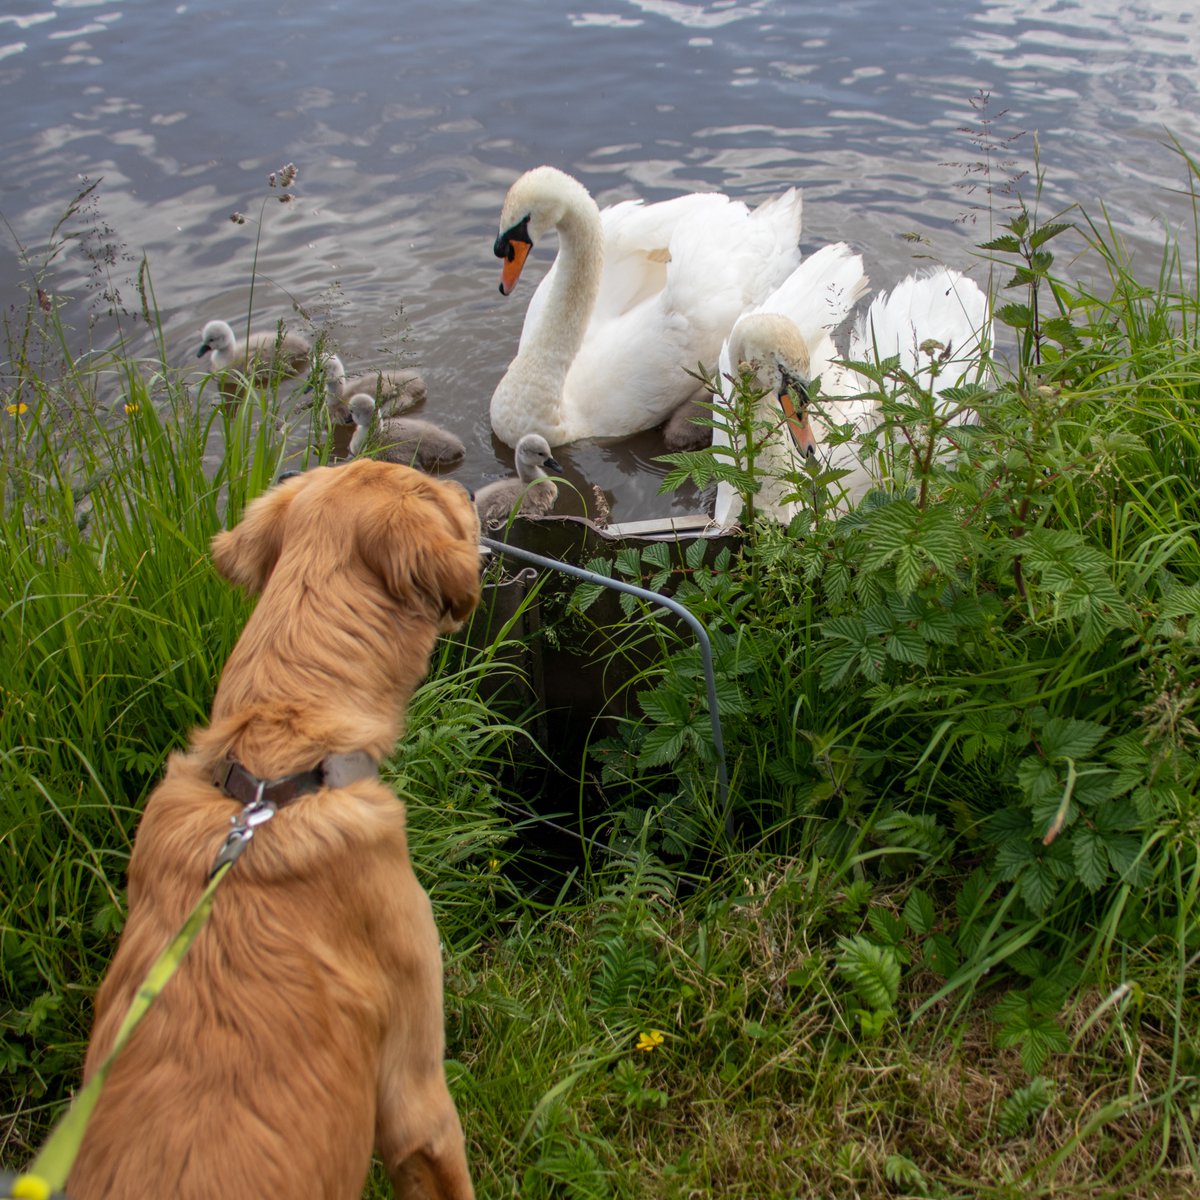 Finlay saying hello to the #swans and #cygnets on the #coventrycanal while out on his #canalathon. #redmoonshine #finlay #goldenretriever #goldenpuppy #naturephotography #animalphotography #lifesbetterbywater #boatsthattweet #nuneaton #springwoodhaven #outdoorphotography